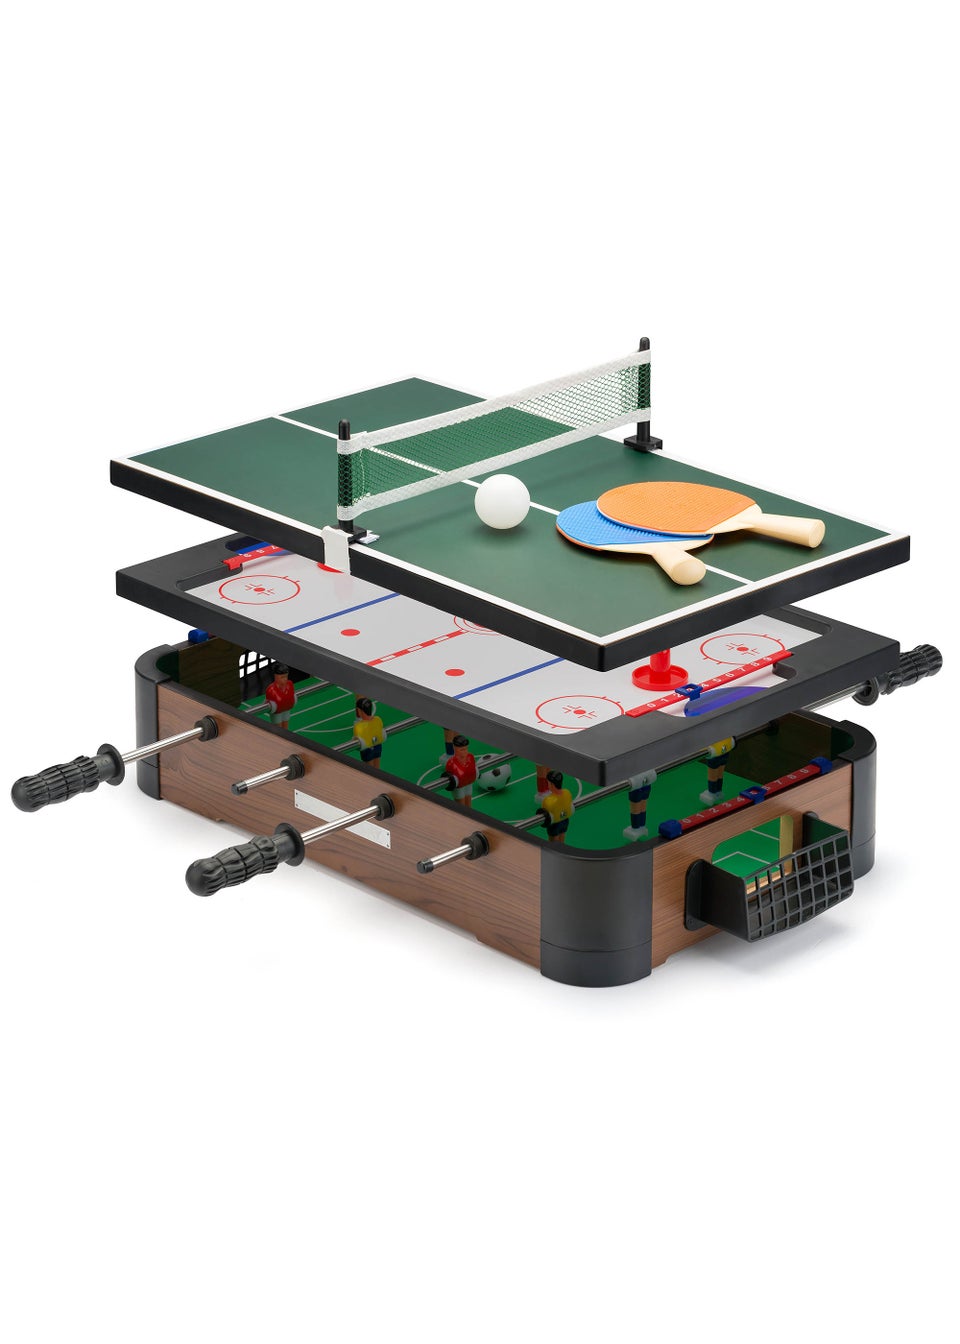 20" 3 In 1 Games Table